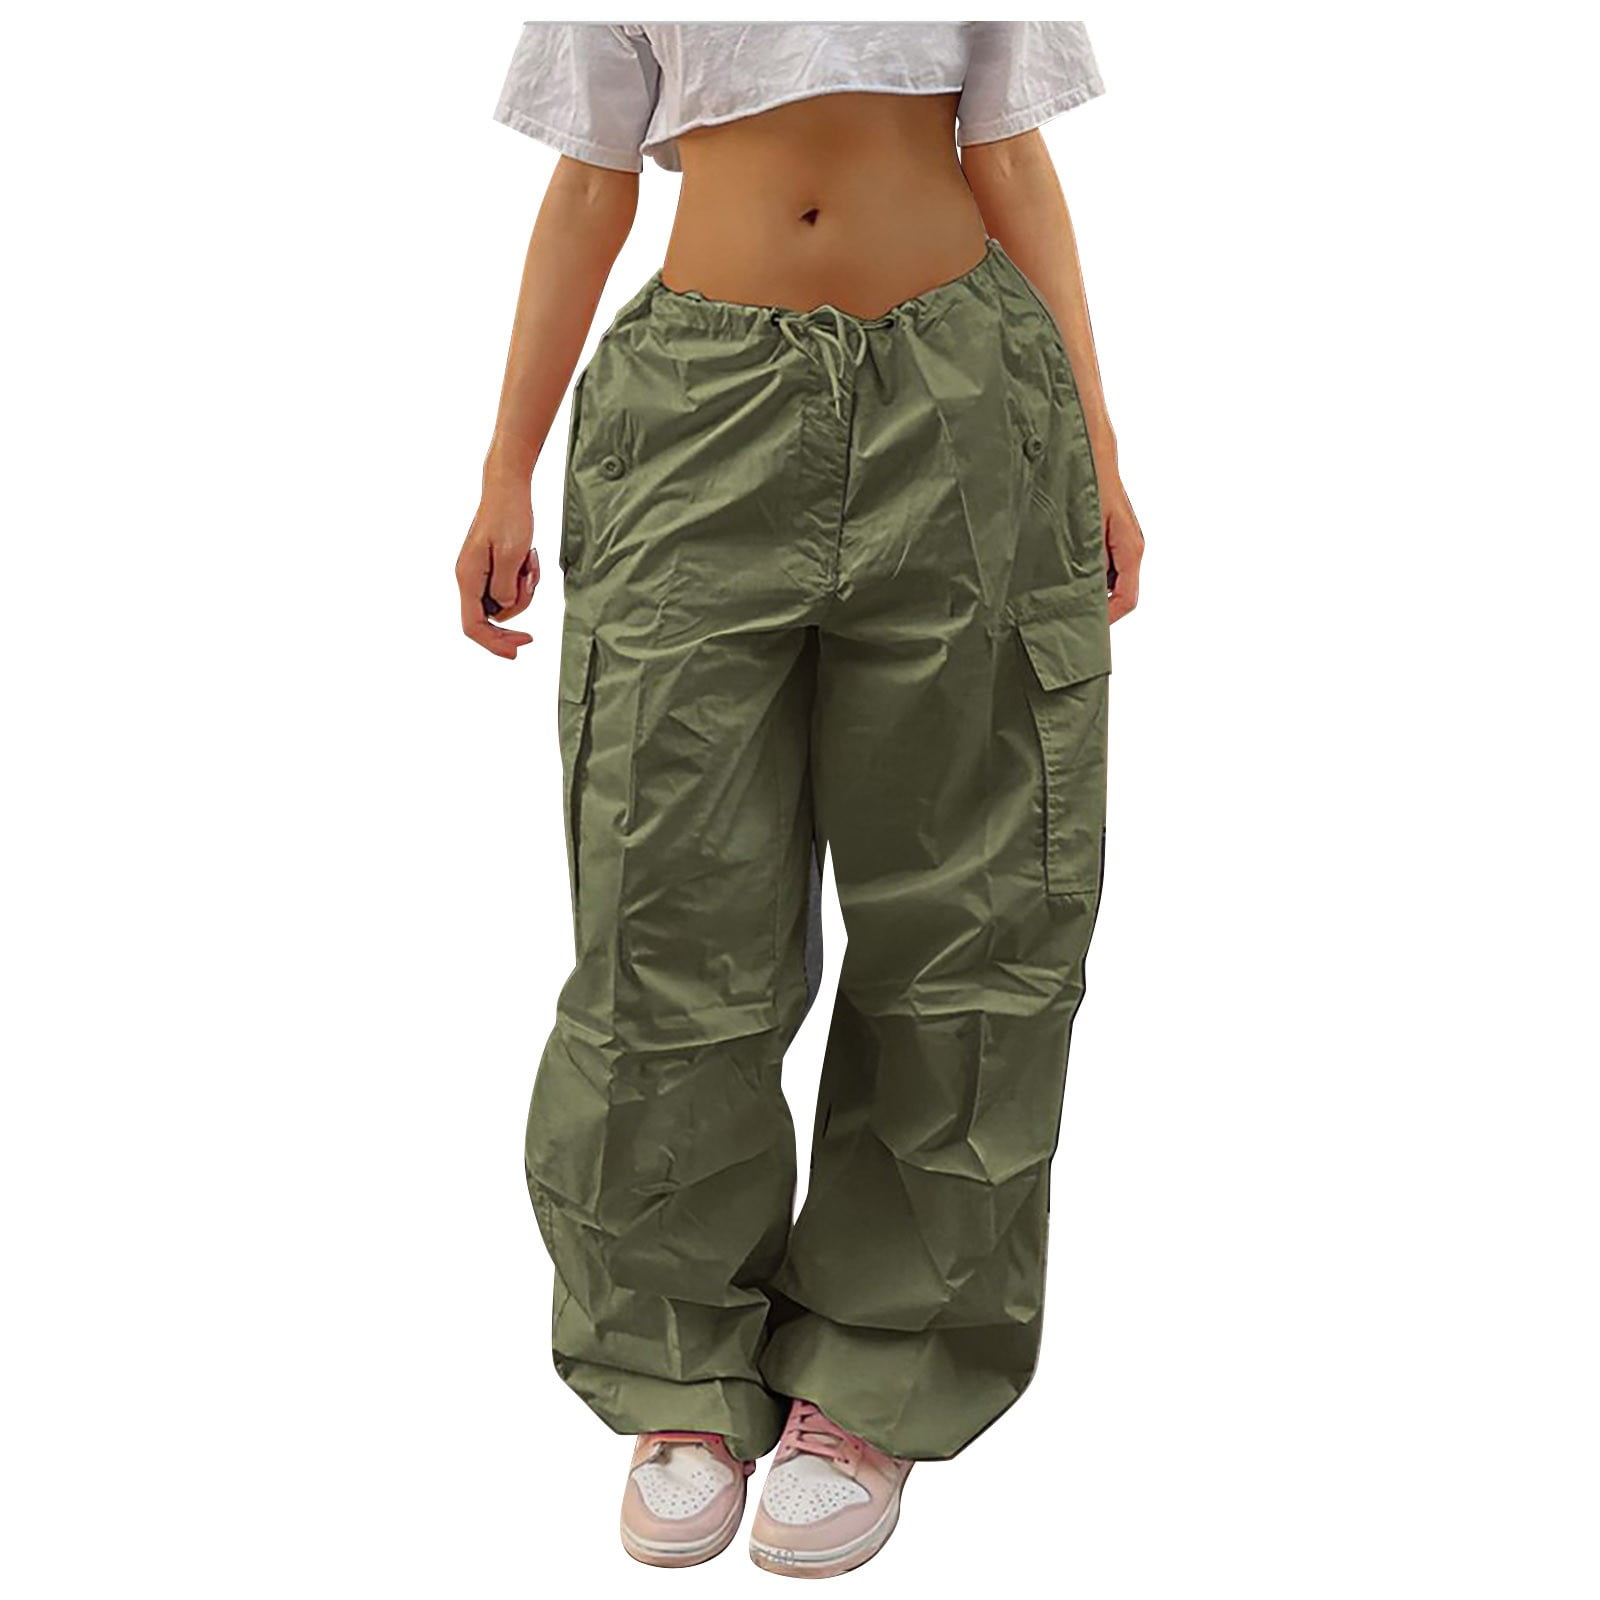 YDOJG Women's Cargo Pants Casual Plus Size Tethered Straight Cargo ...